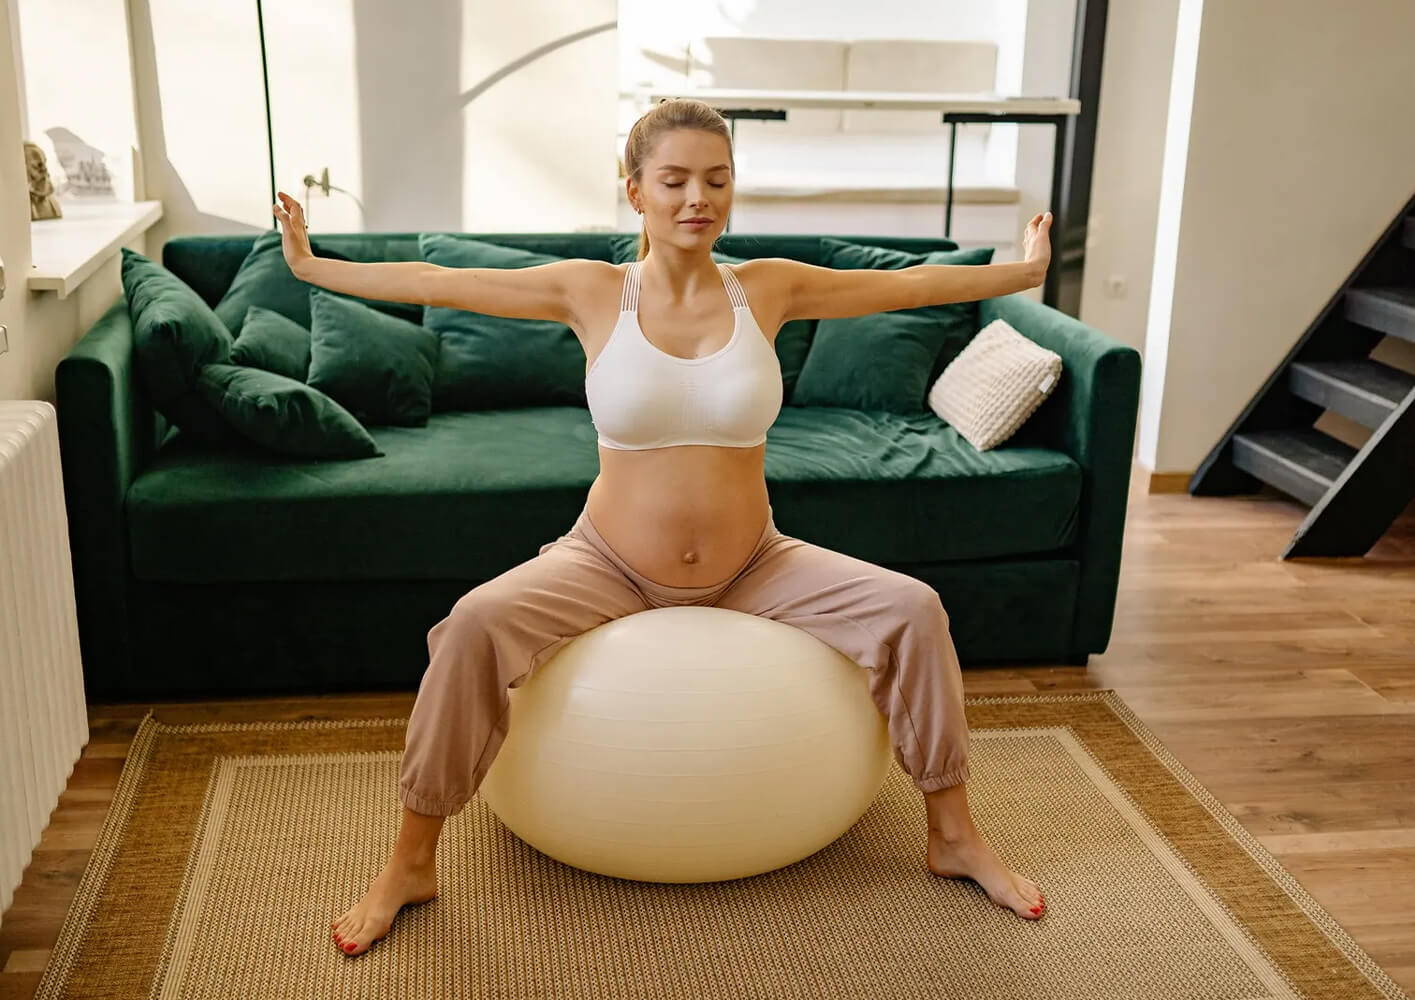 Pregnancy Exercises: Five Ways to Exercise from Home When You Are Pregnant